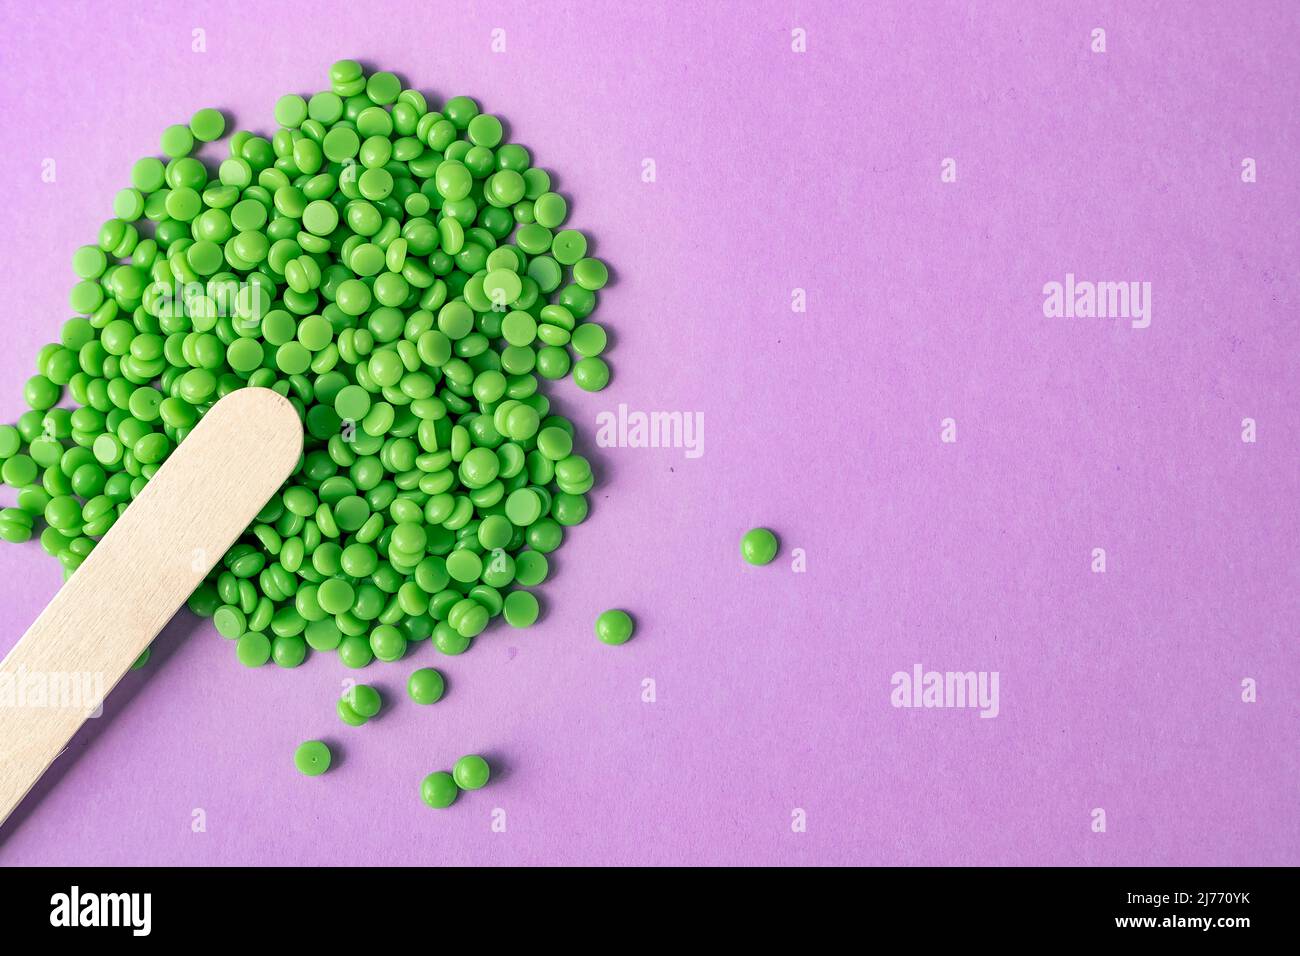 Beautiful green wax granules for depilation, and wooden spatulas on a pink background. Epilation, depilation, removal of unwanted hair. View from abov Stock Photo